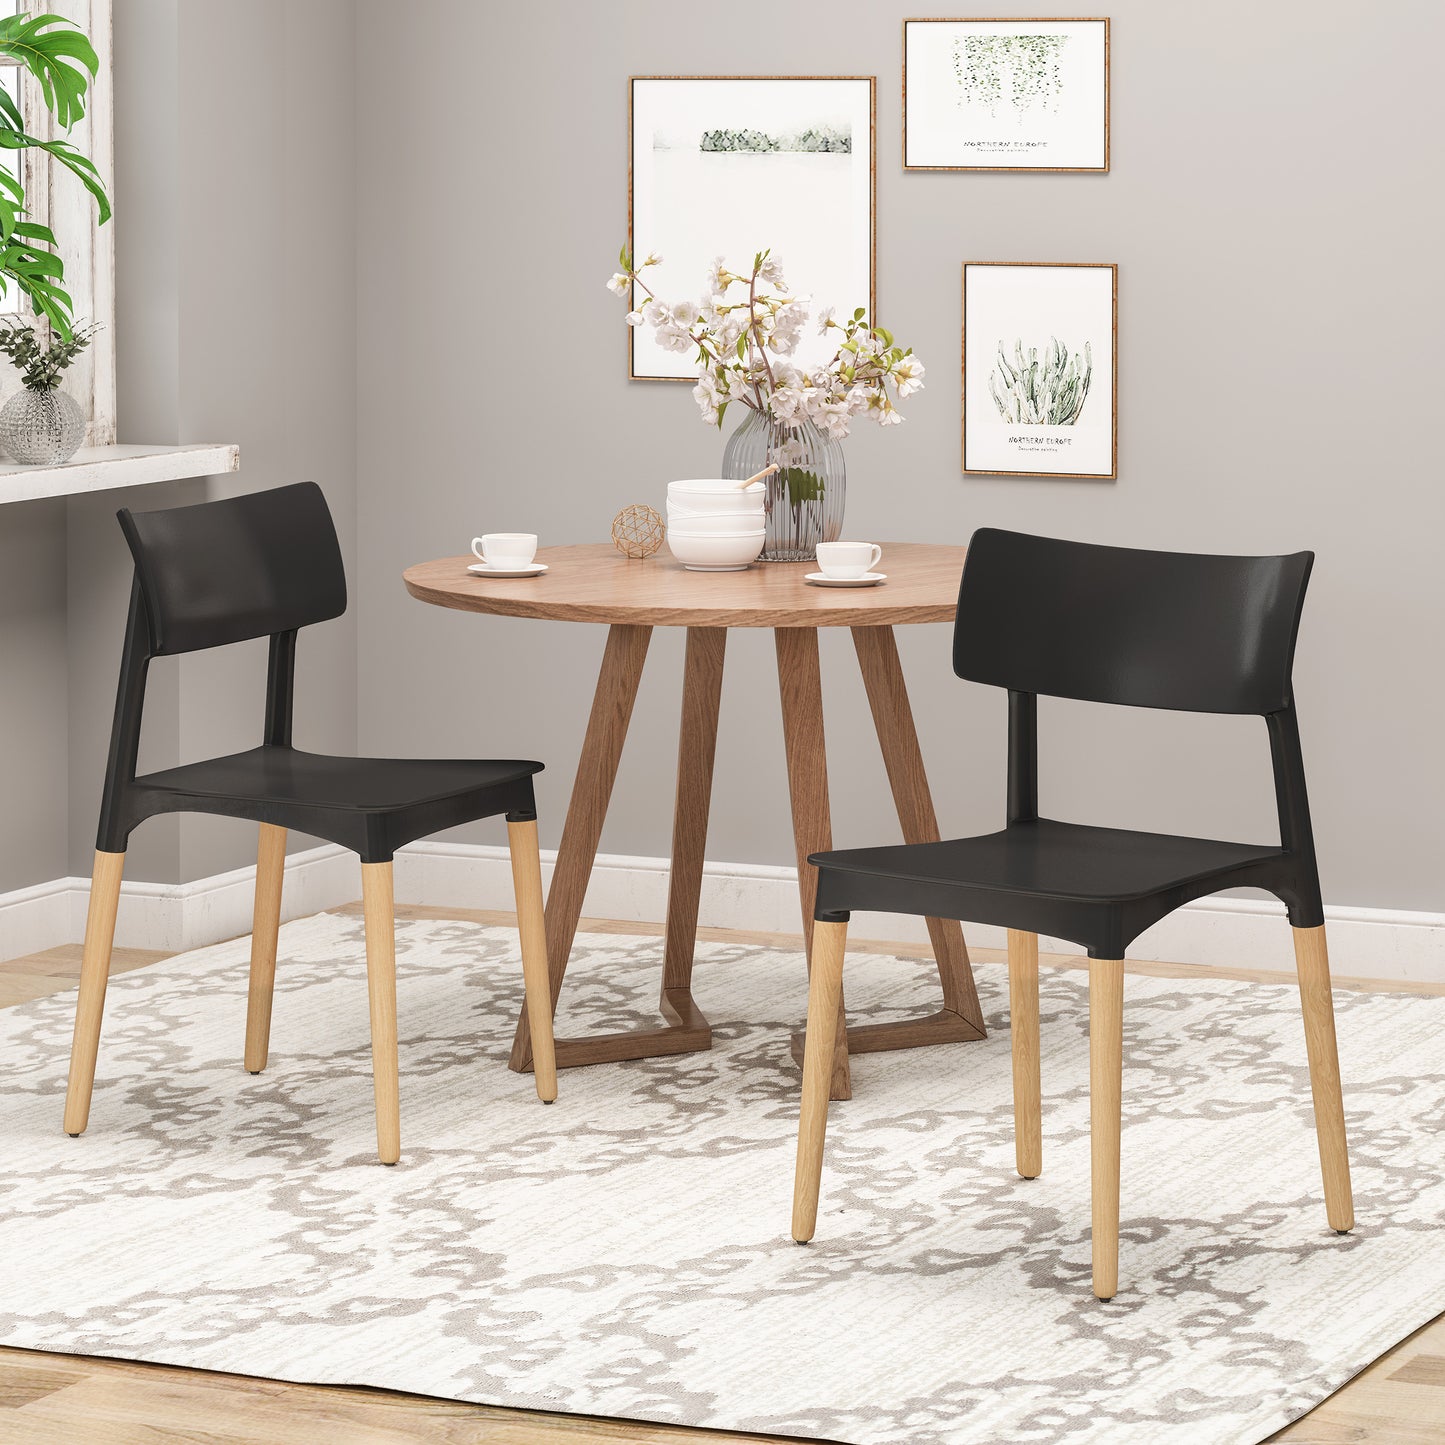 Isabel Modern Dining Chair with Beech Wood Legs (Set of 2)